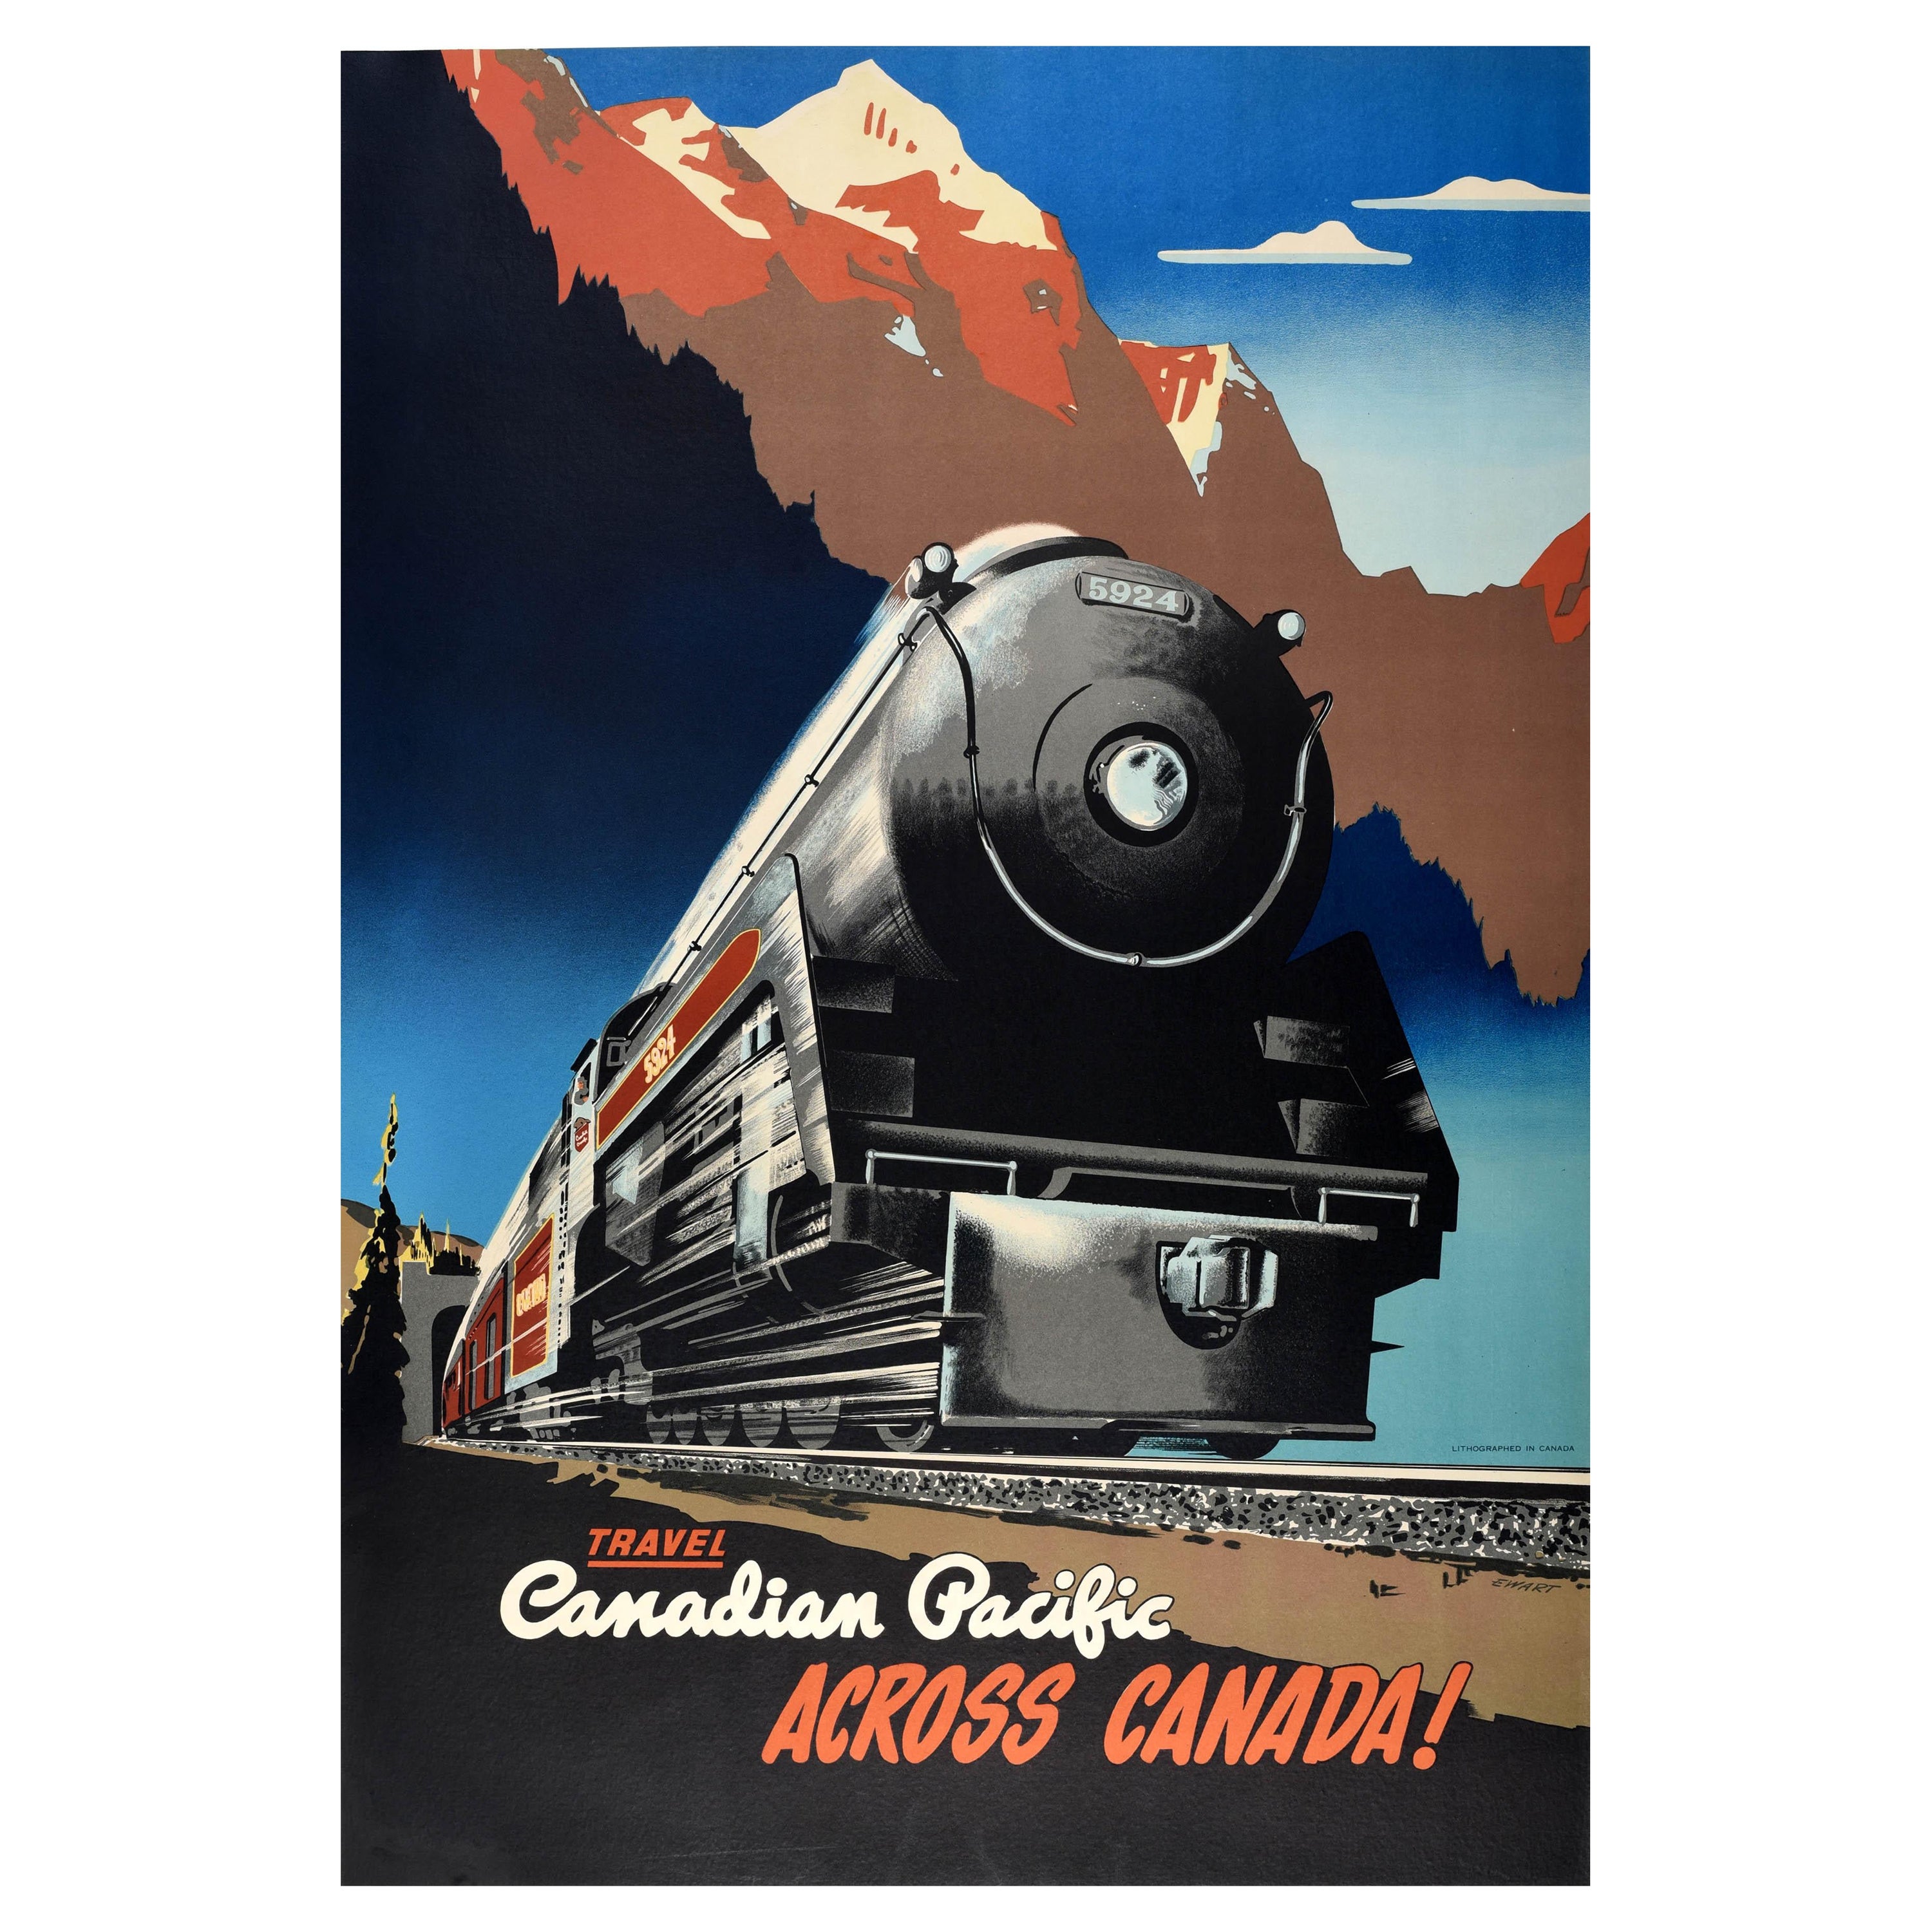 Original Vintage Railway Poster Travel Canadian Pacific Across Canada Train Art For Sale